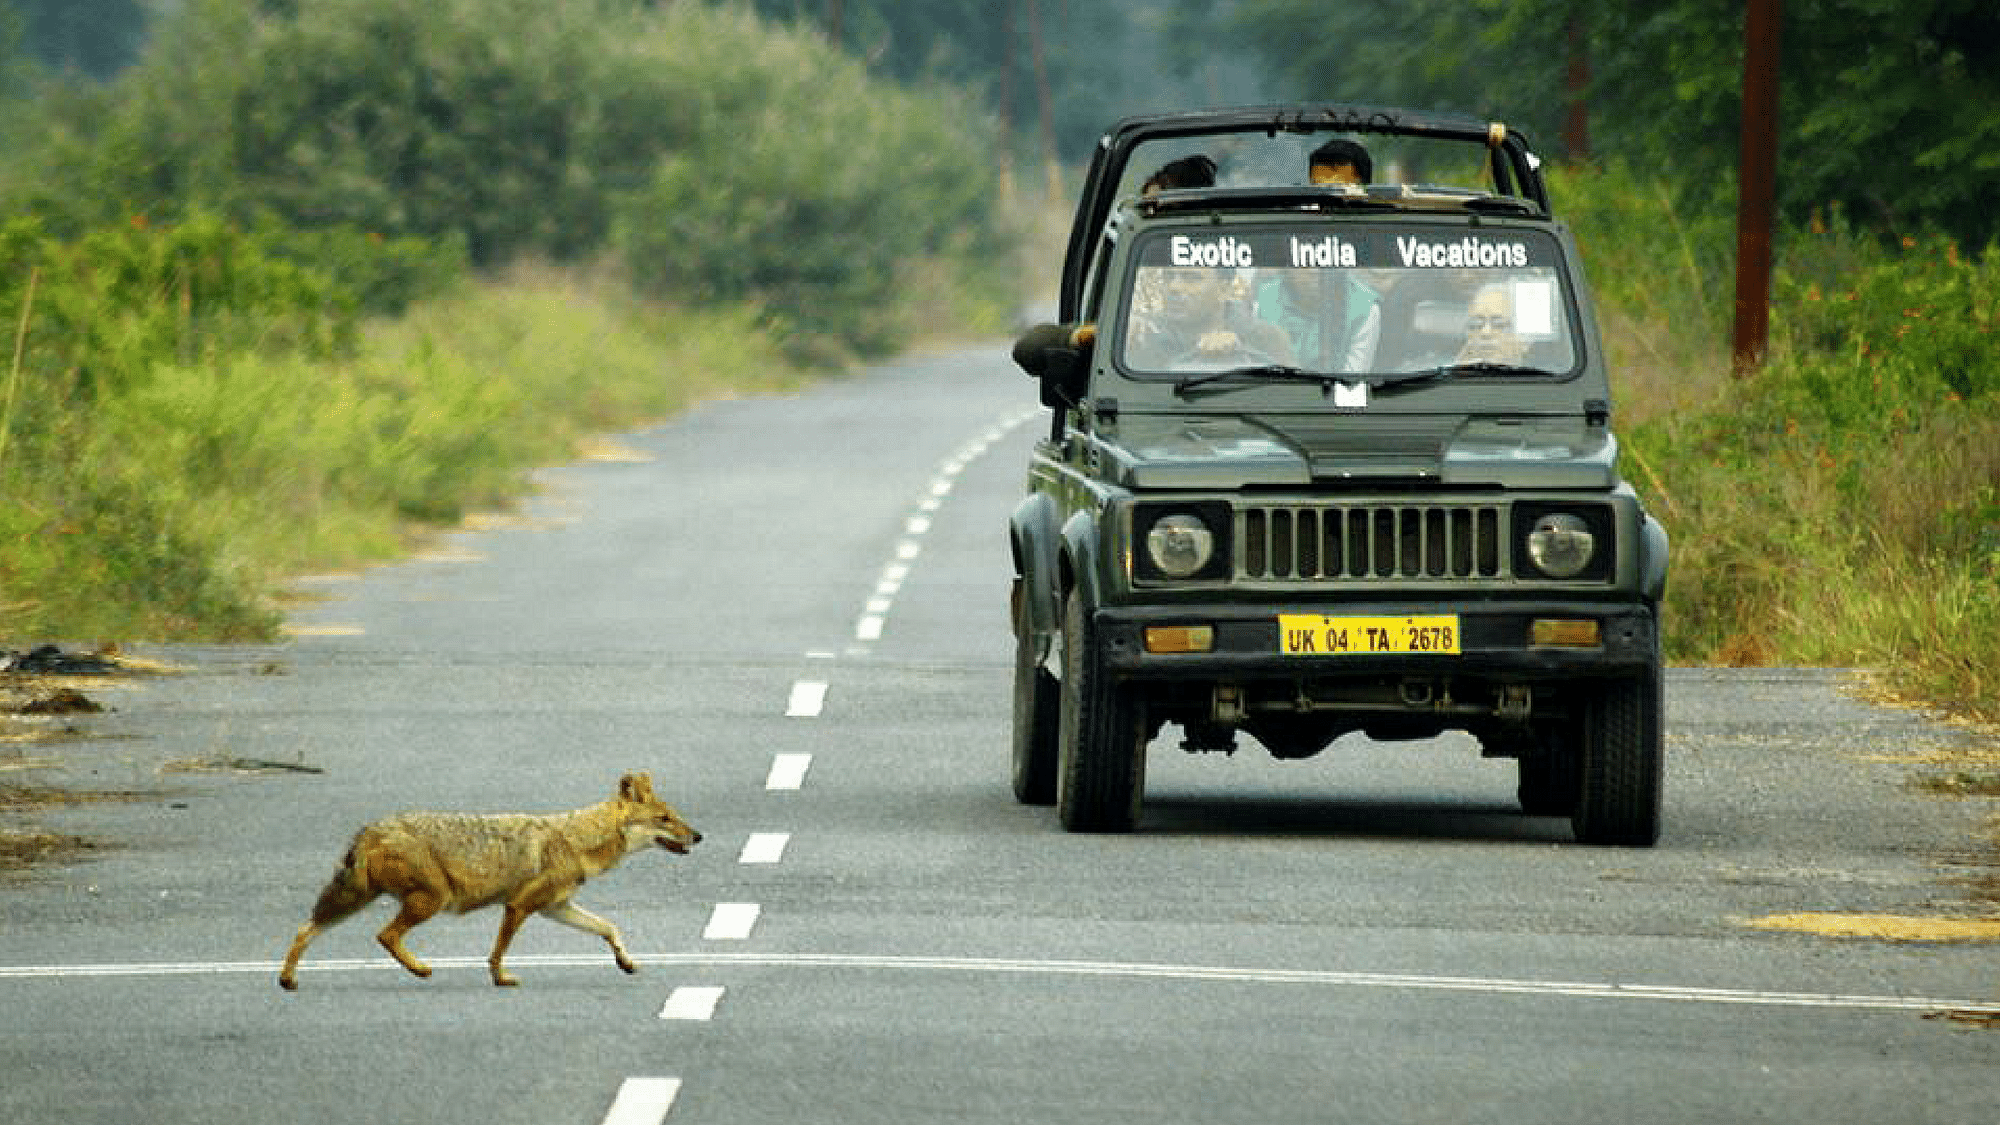 A Gypsy in Corbett national park causes a frightened jackal to flee. (Photo Courtesy: Indranil Datta)